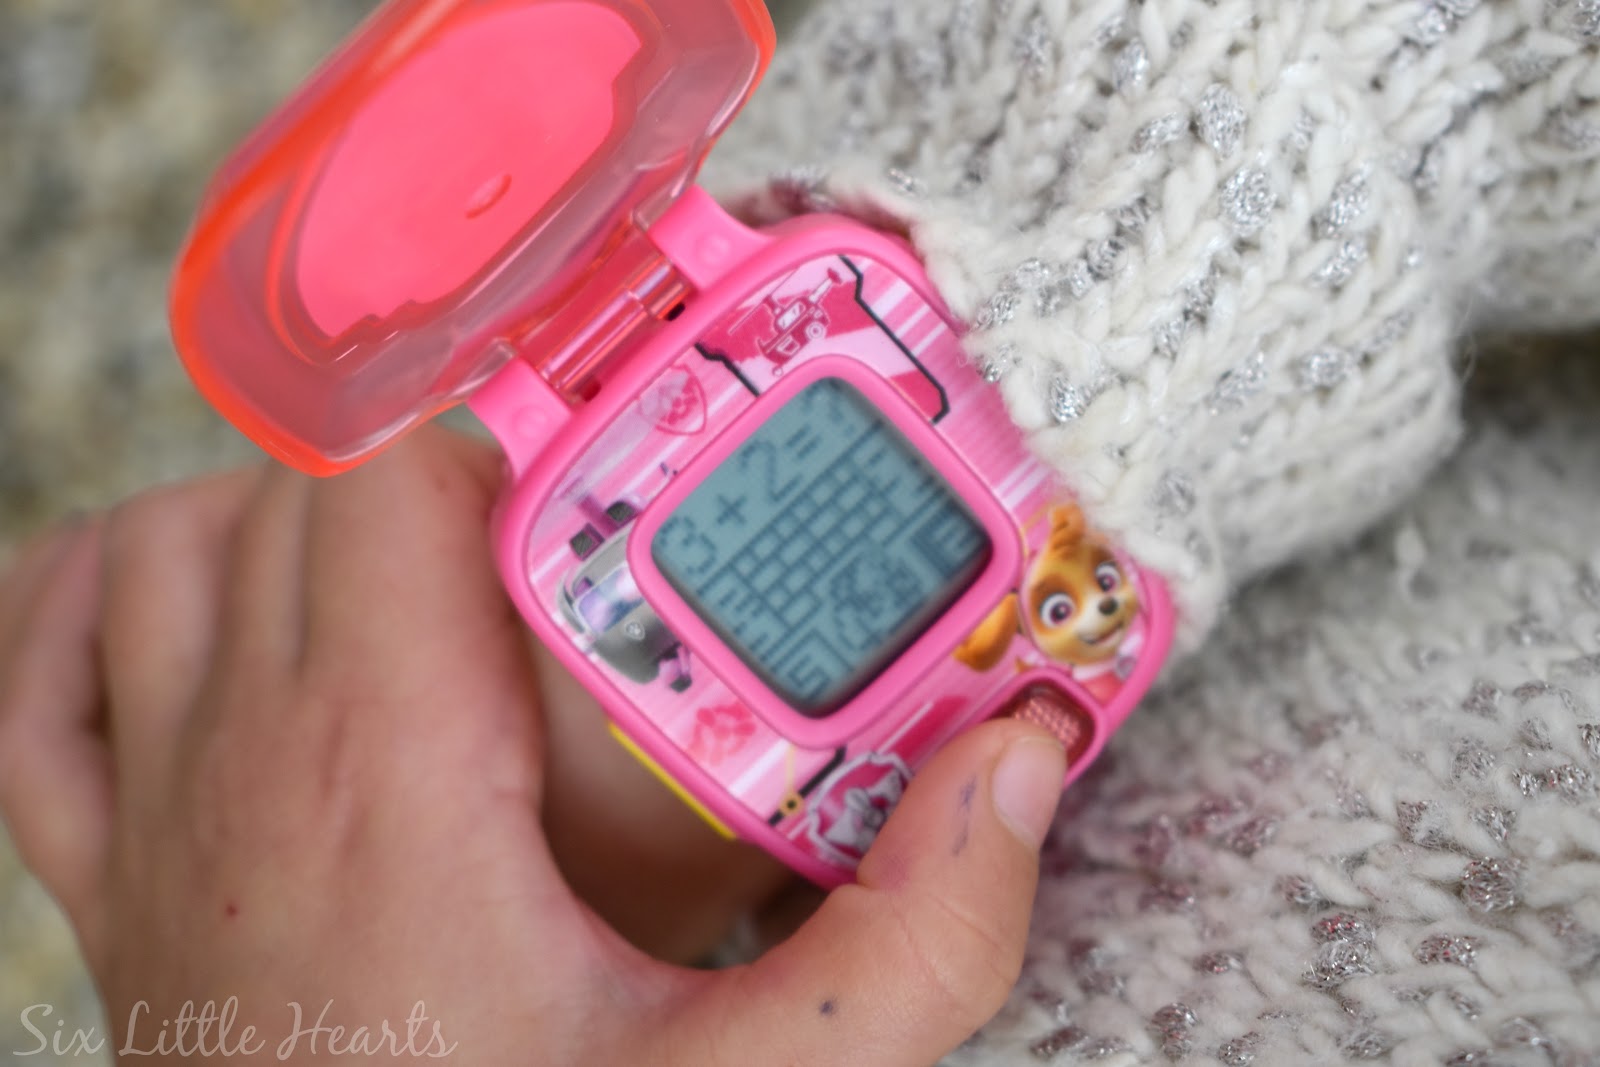 Little VTech Paw Patrol Learning Watch Review And WIN a Paw Watch For Your Child!